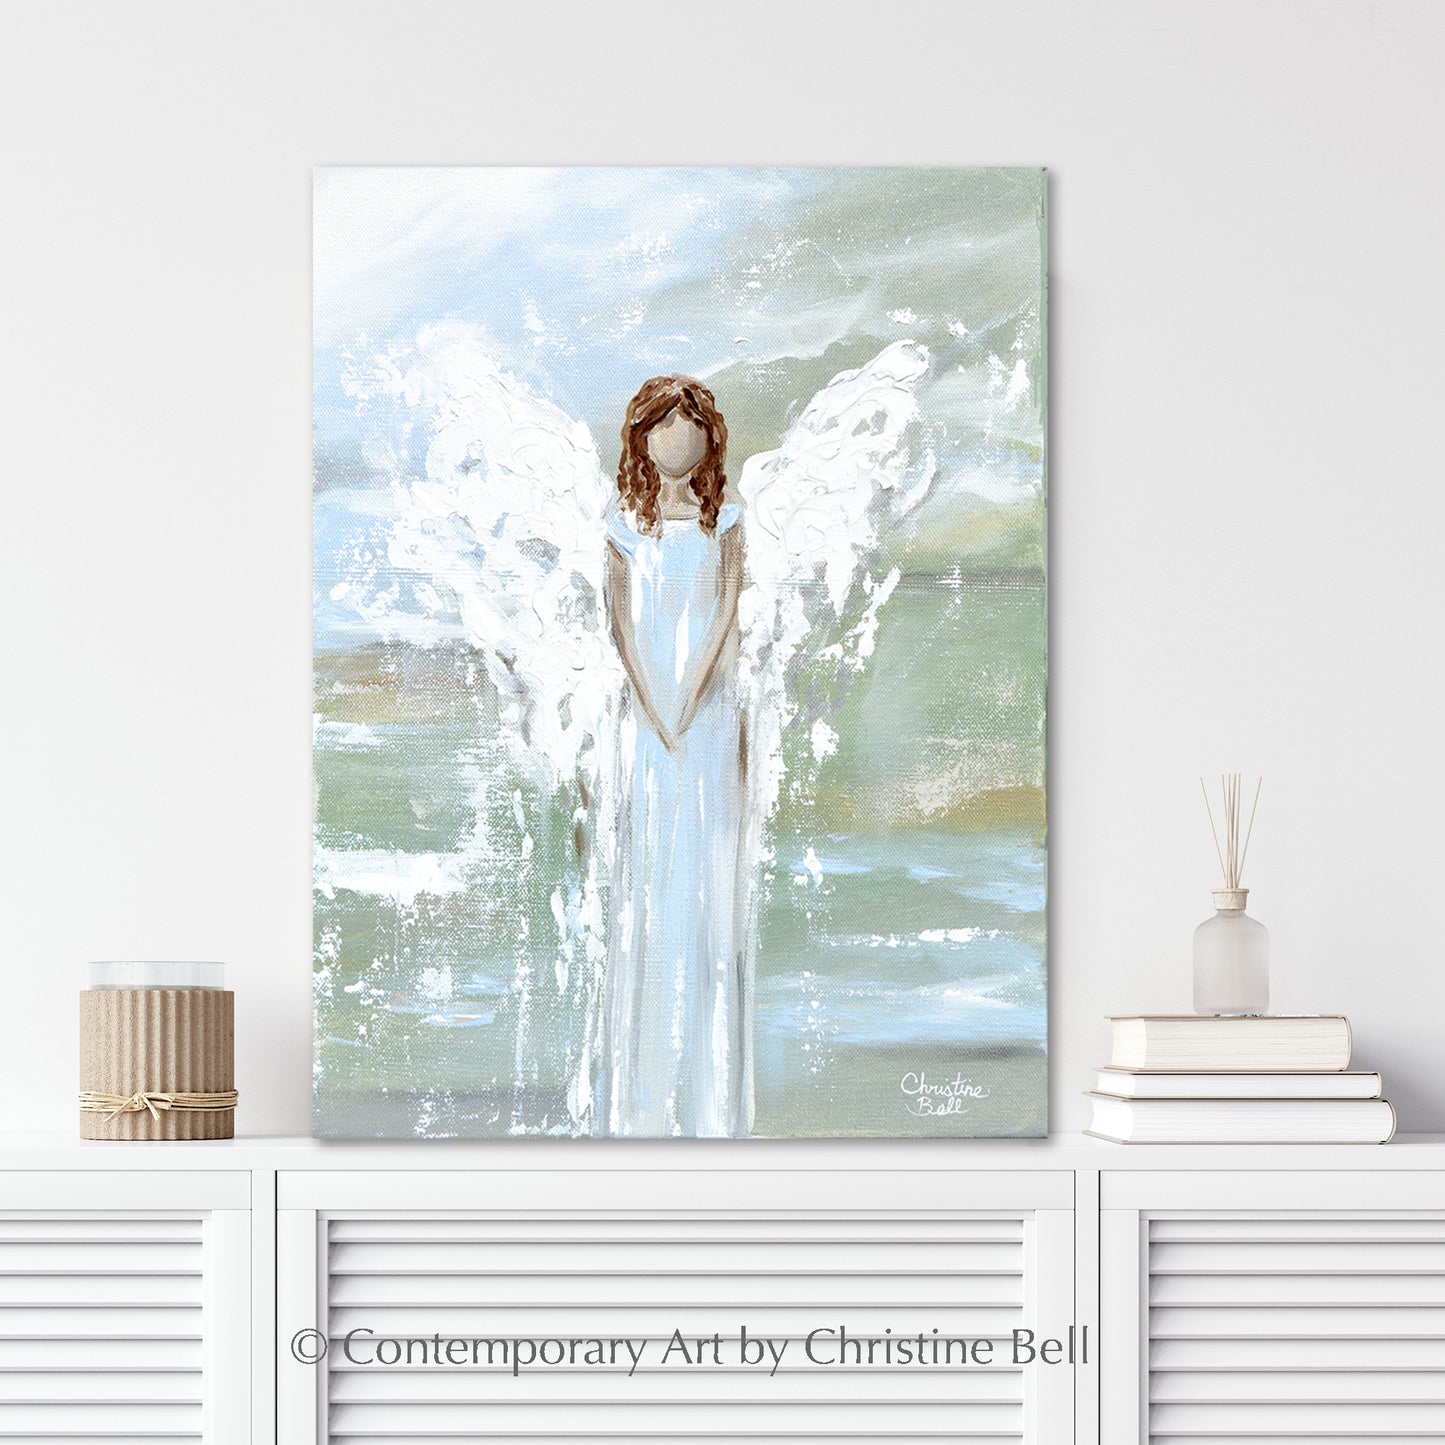 "Her Blessings" New ORIGINAL Angel Painting, Textured, Light Blue, Green, 12x16"